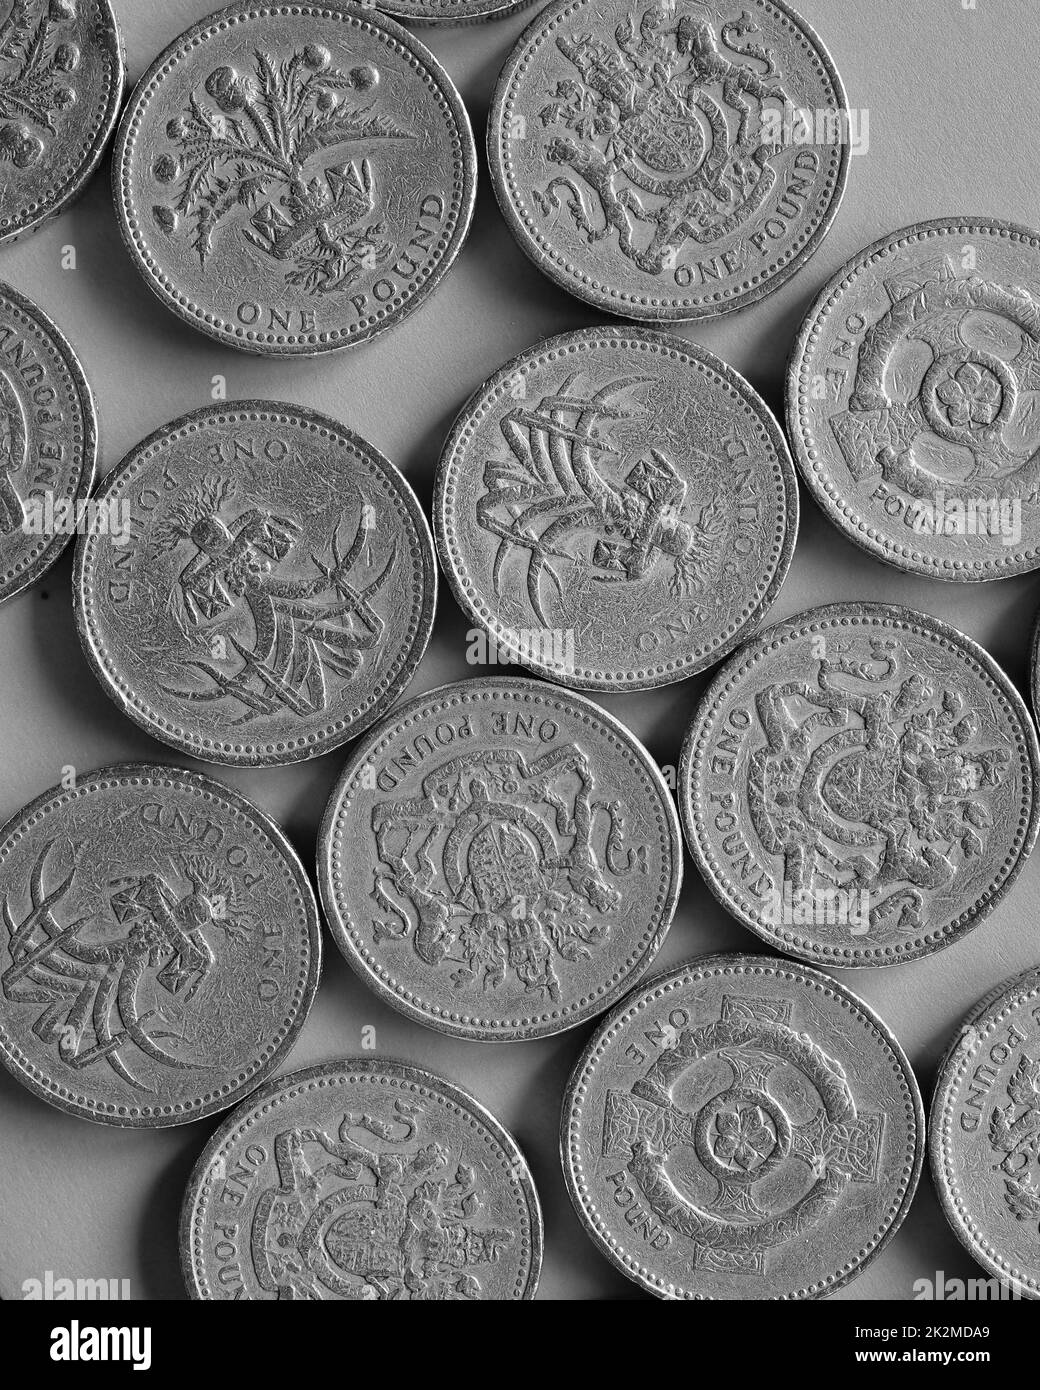 One Pound coins, United Kingdom in black and white Stock Photo